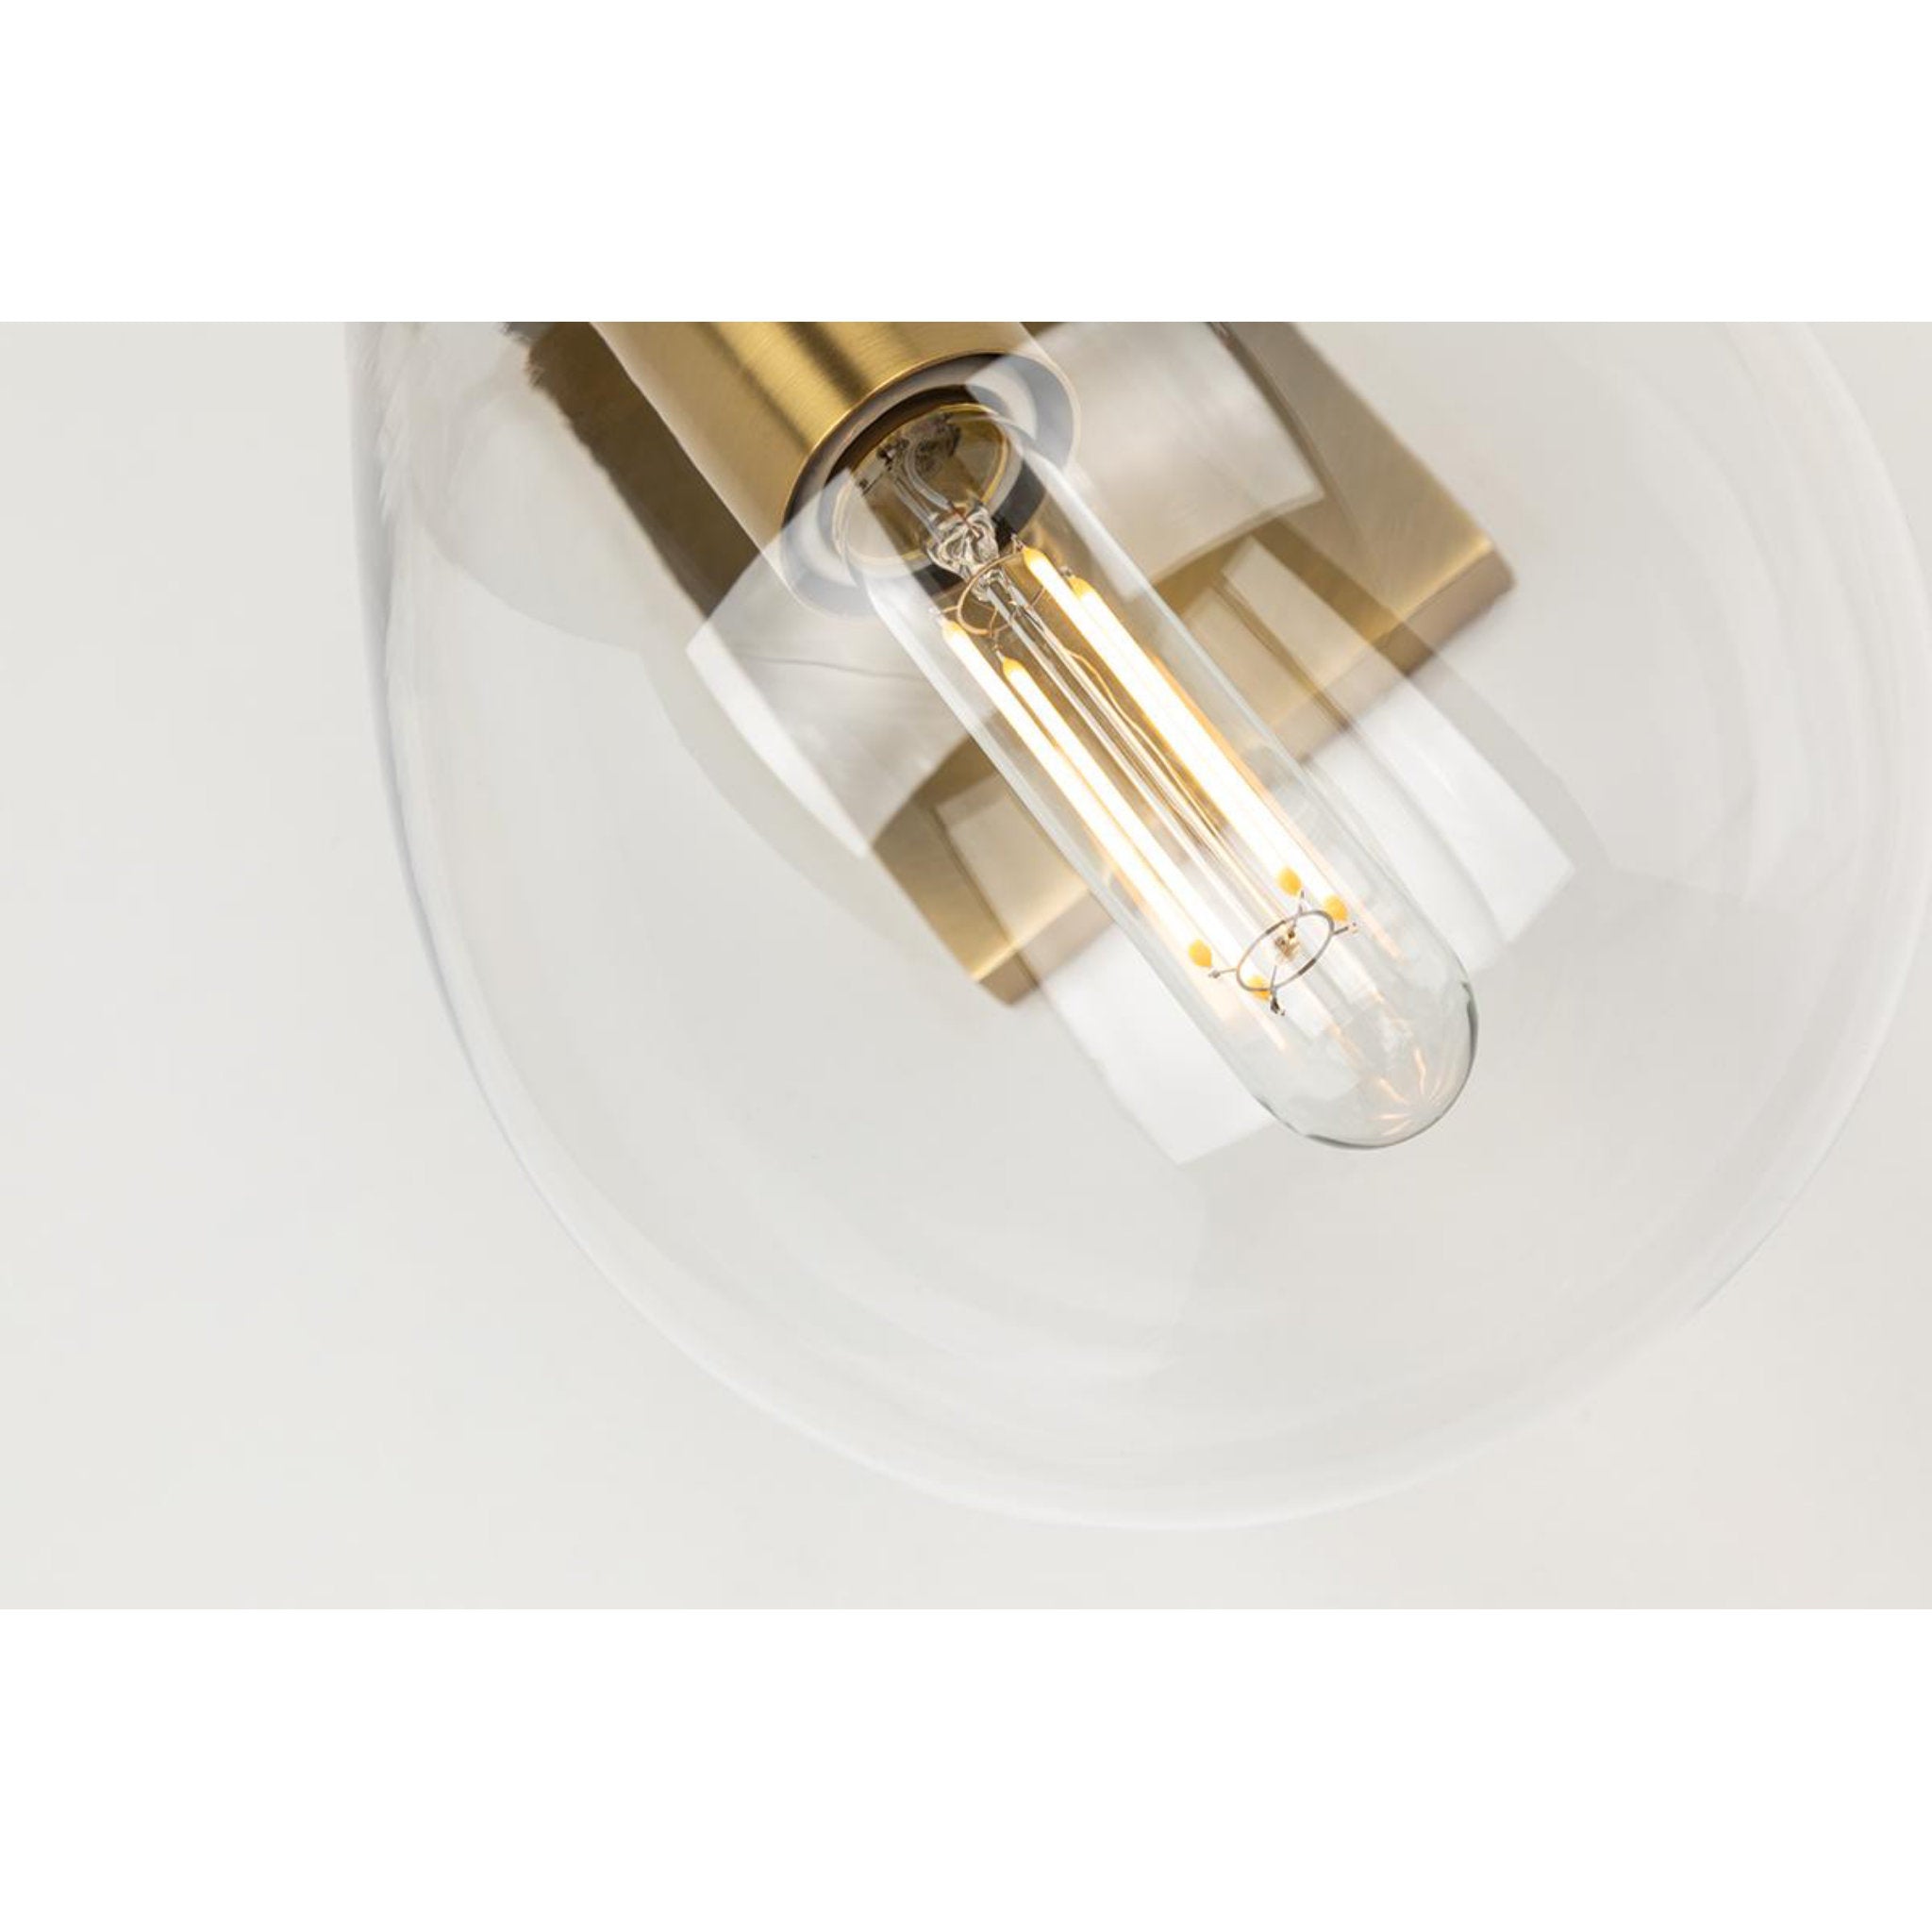 Ivy 1 Light Wall Sconce in Polished Nickel by Becki Owens